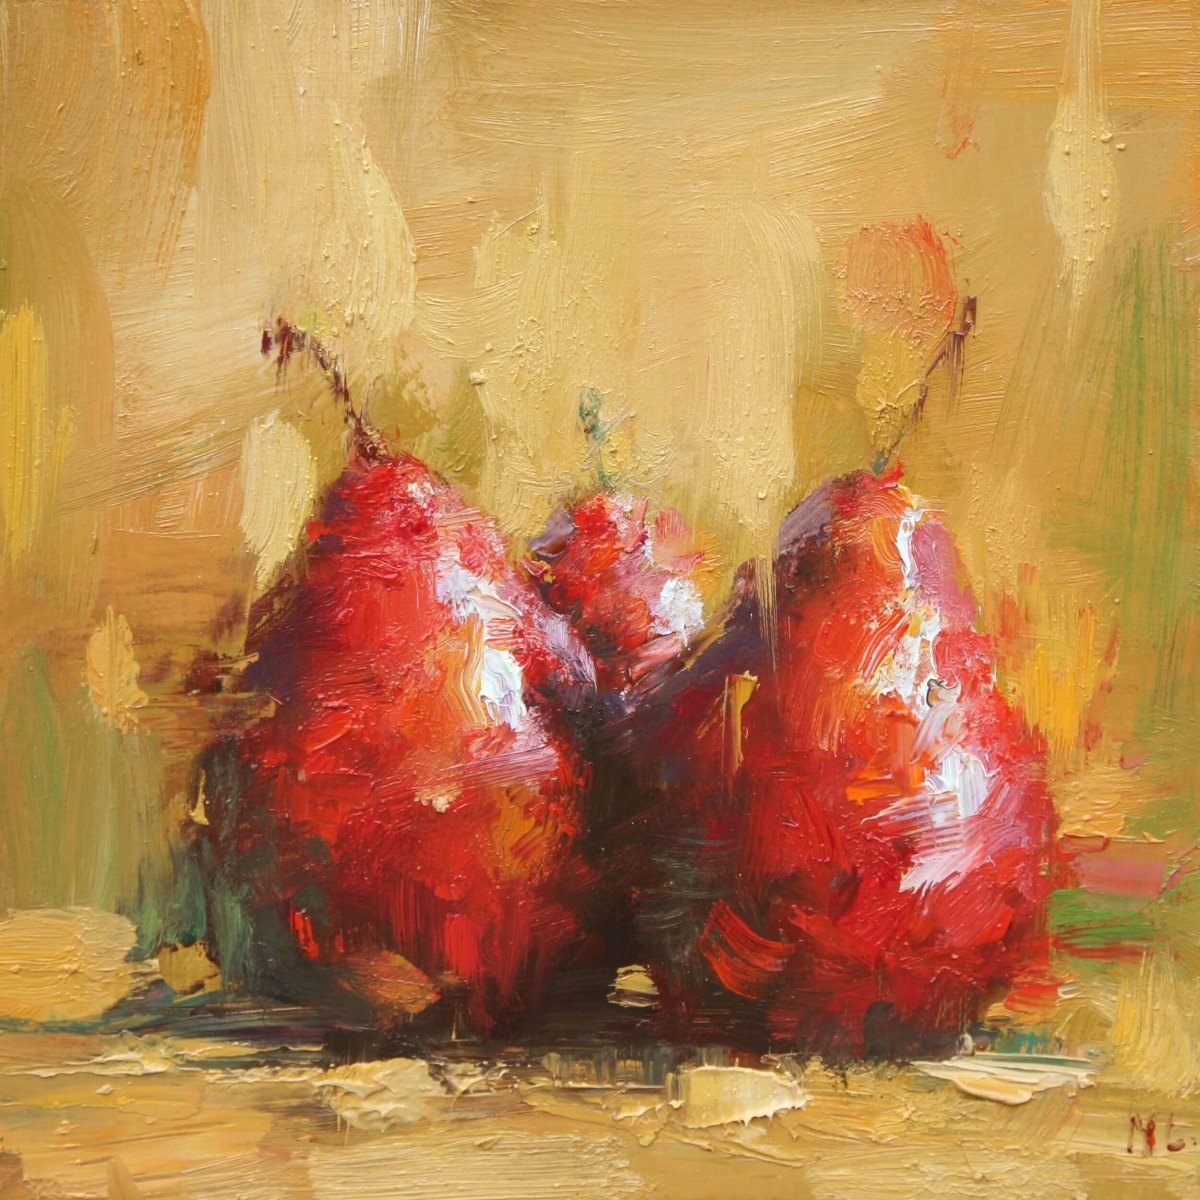 Three Pears by Ning Lee at LePrince Galleries